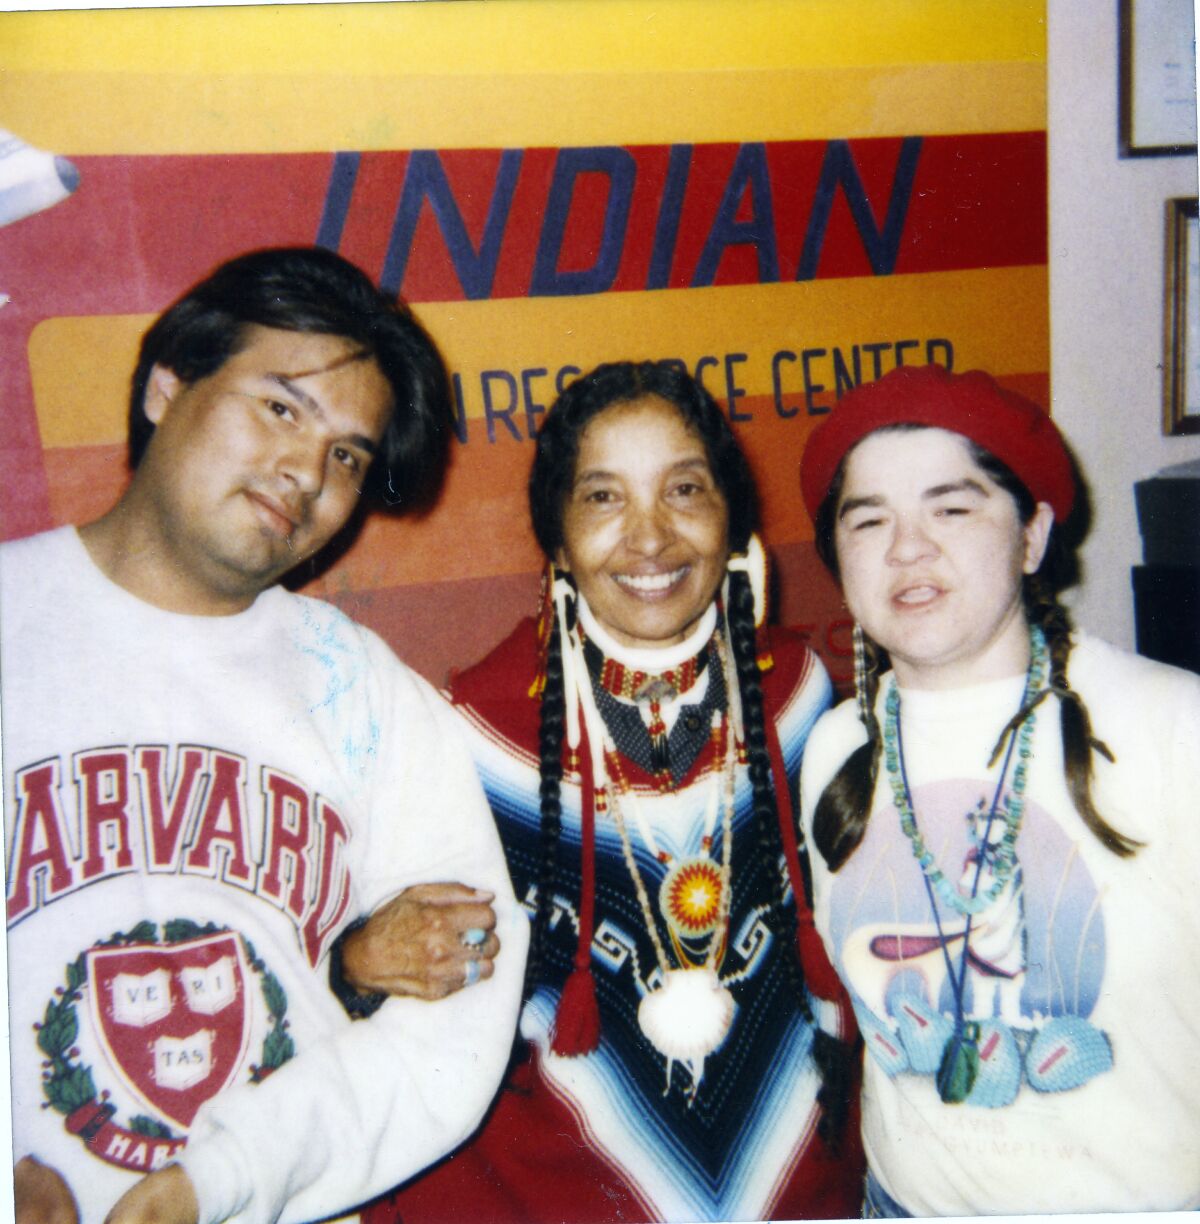 Karen Vigneault (far right), one of the founders of Nations of the Four Directions, with two unidentified people.